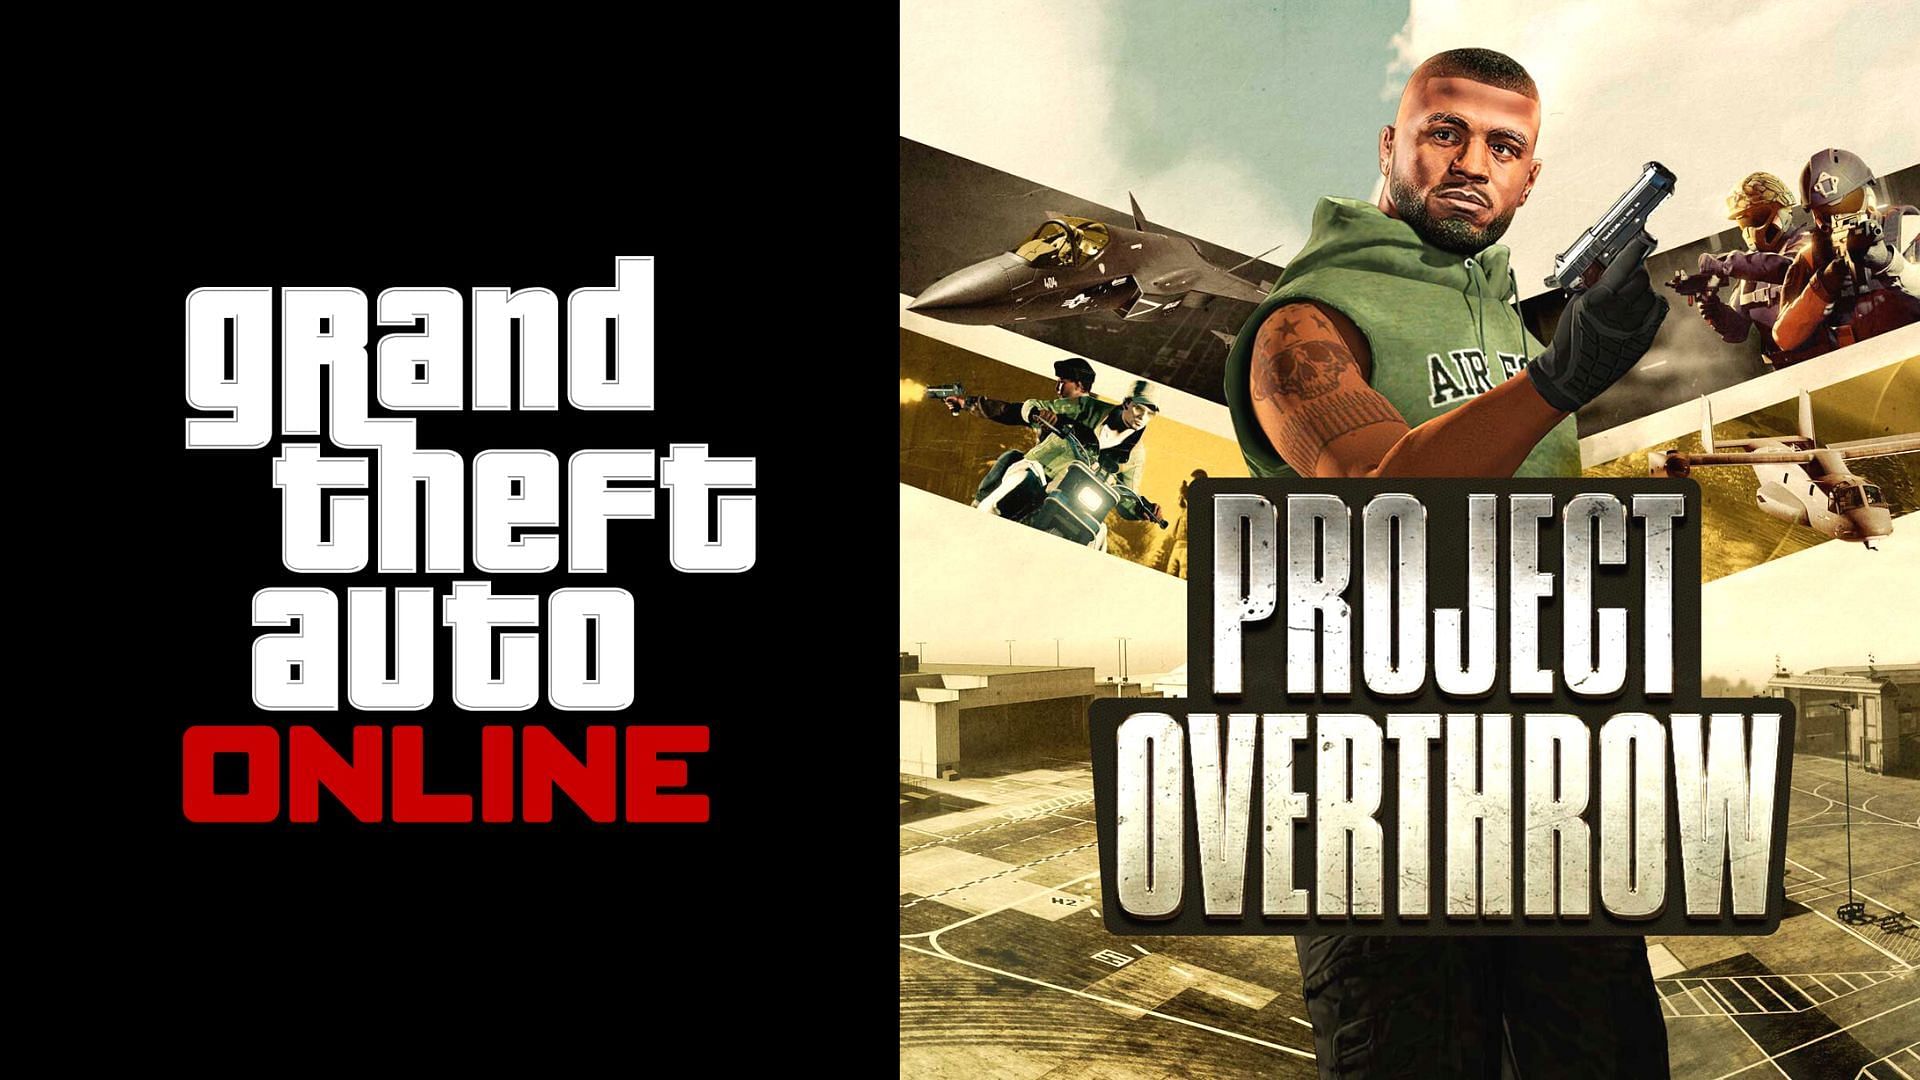 A new report suggests that two million GTA Online players have played Project Overthrow mission since its release (Image via Rockstar Games)